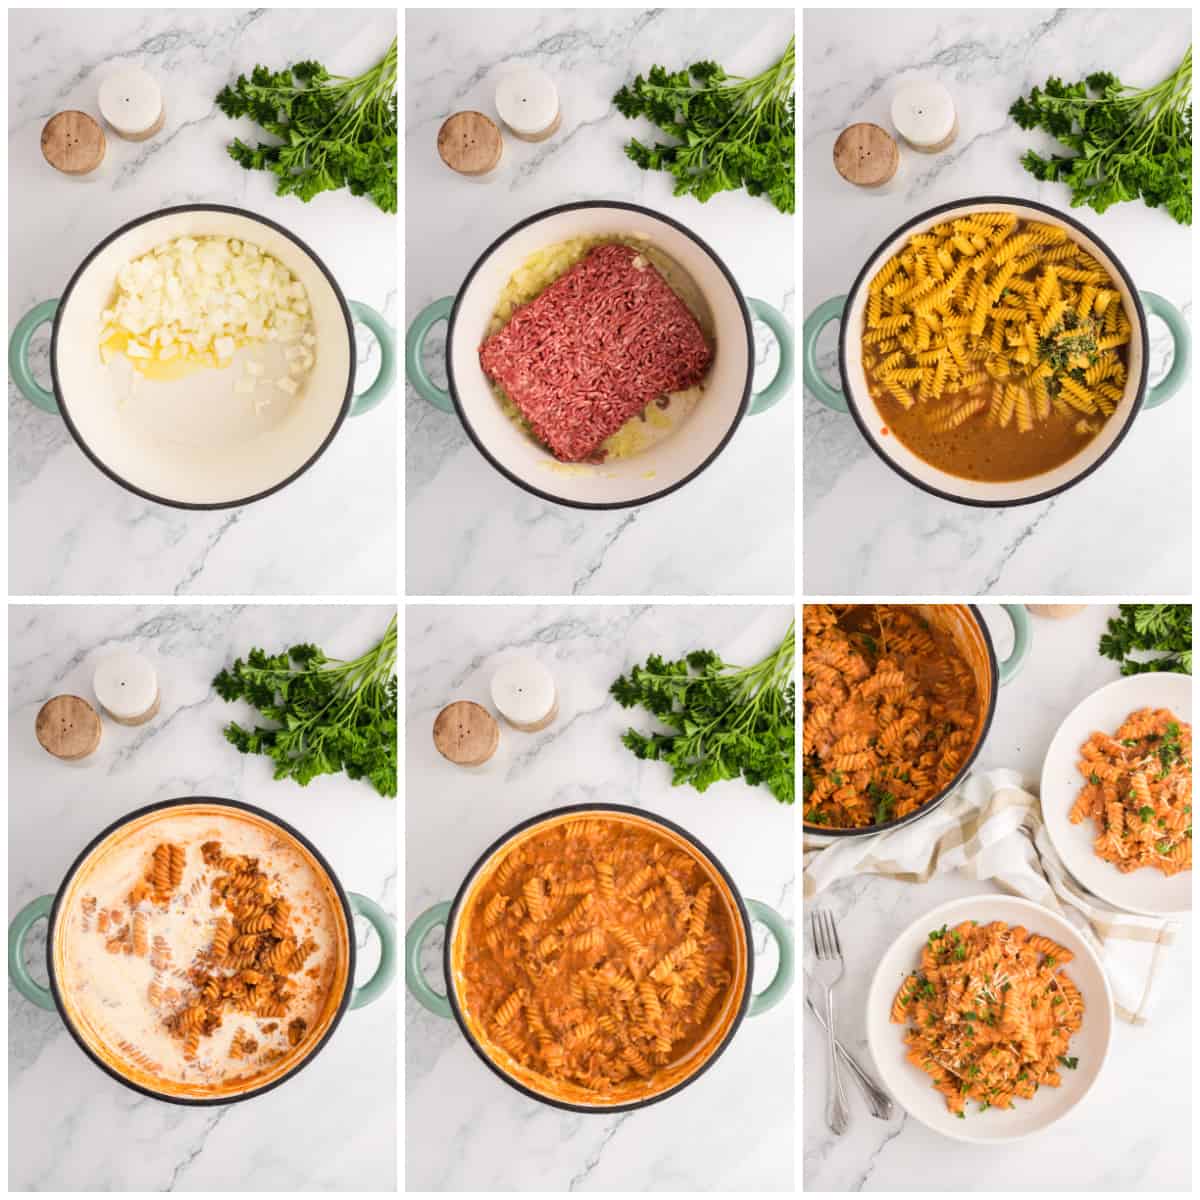 Step by step photos on how to make Ground Beef Pasta.